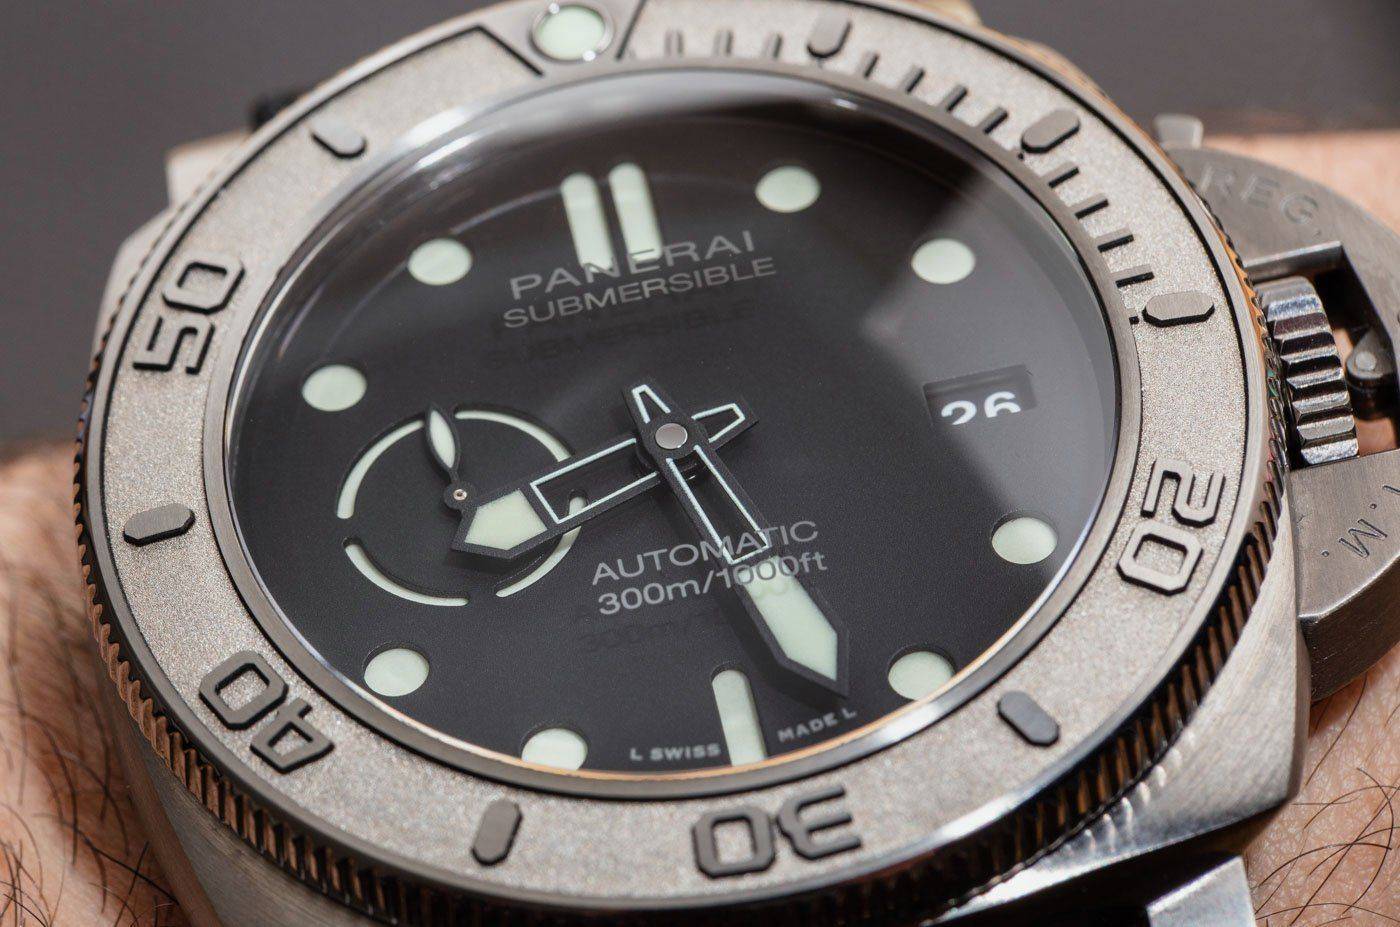 anerai-Submersible-Mike-Horn-Edition-PAM00984-18-2.jpg